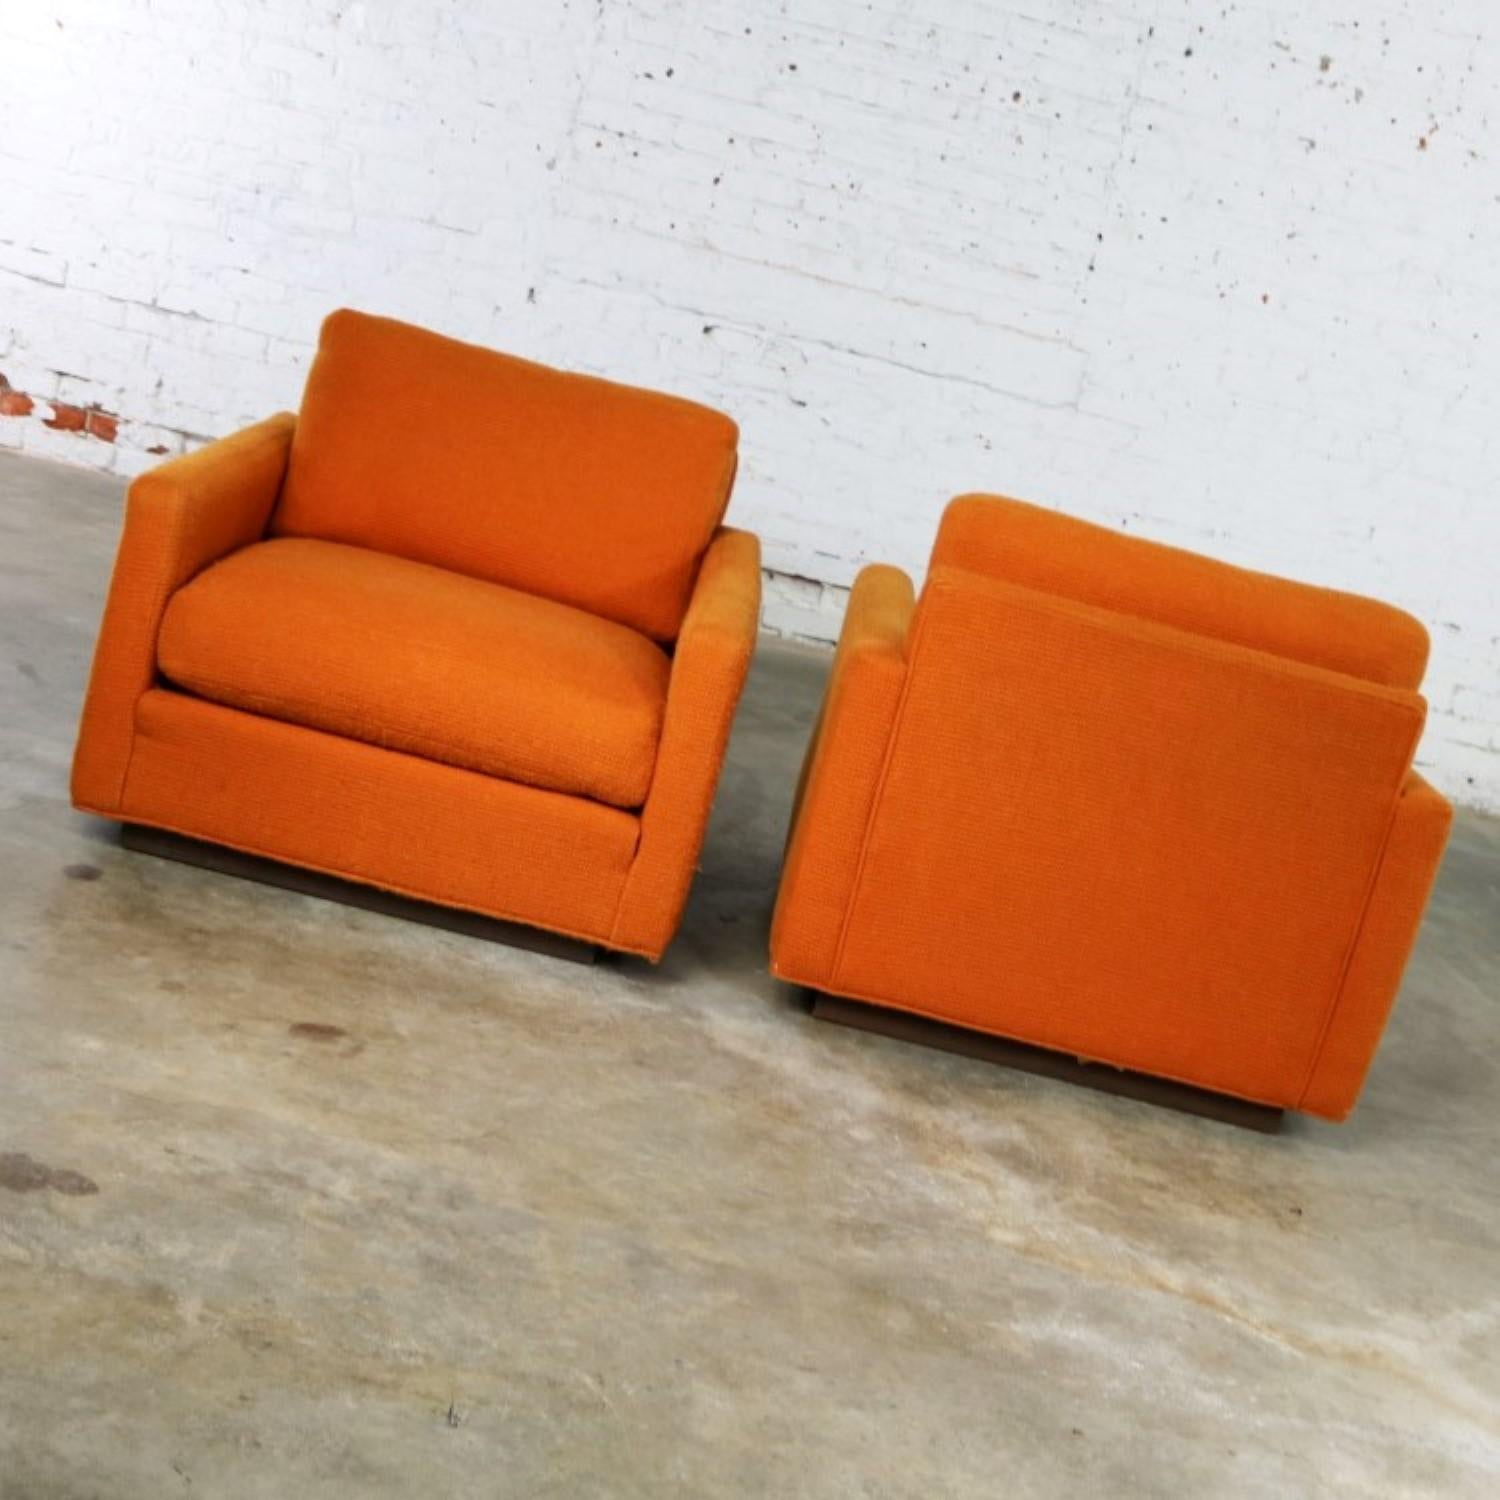 Fabric Thayer Coggin Cube Lounge Chairs Orange Lawson Style Attributed to Milo Baughman